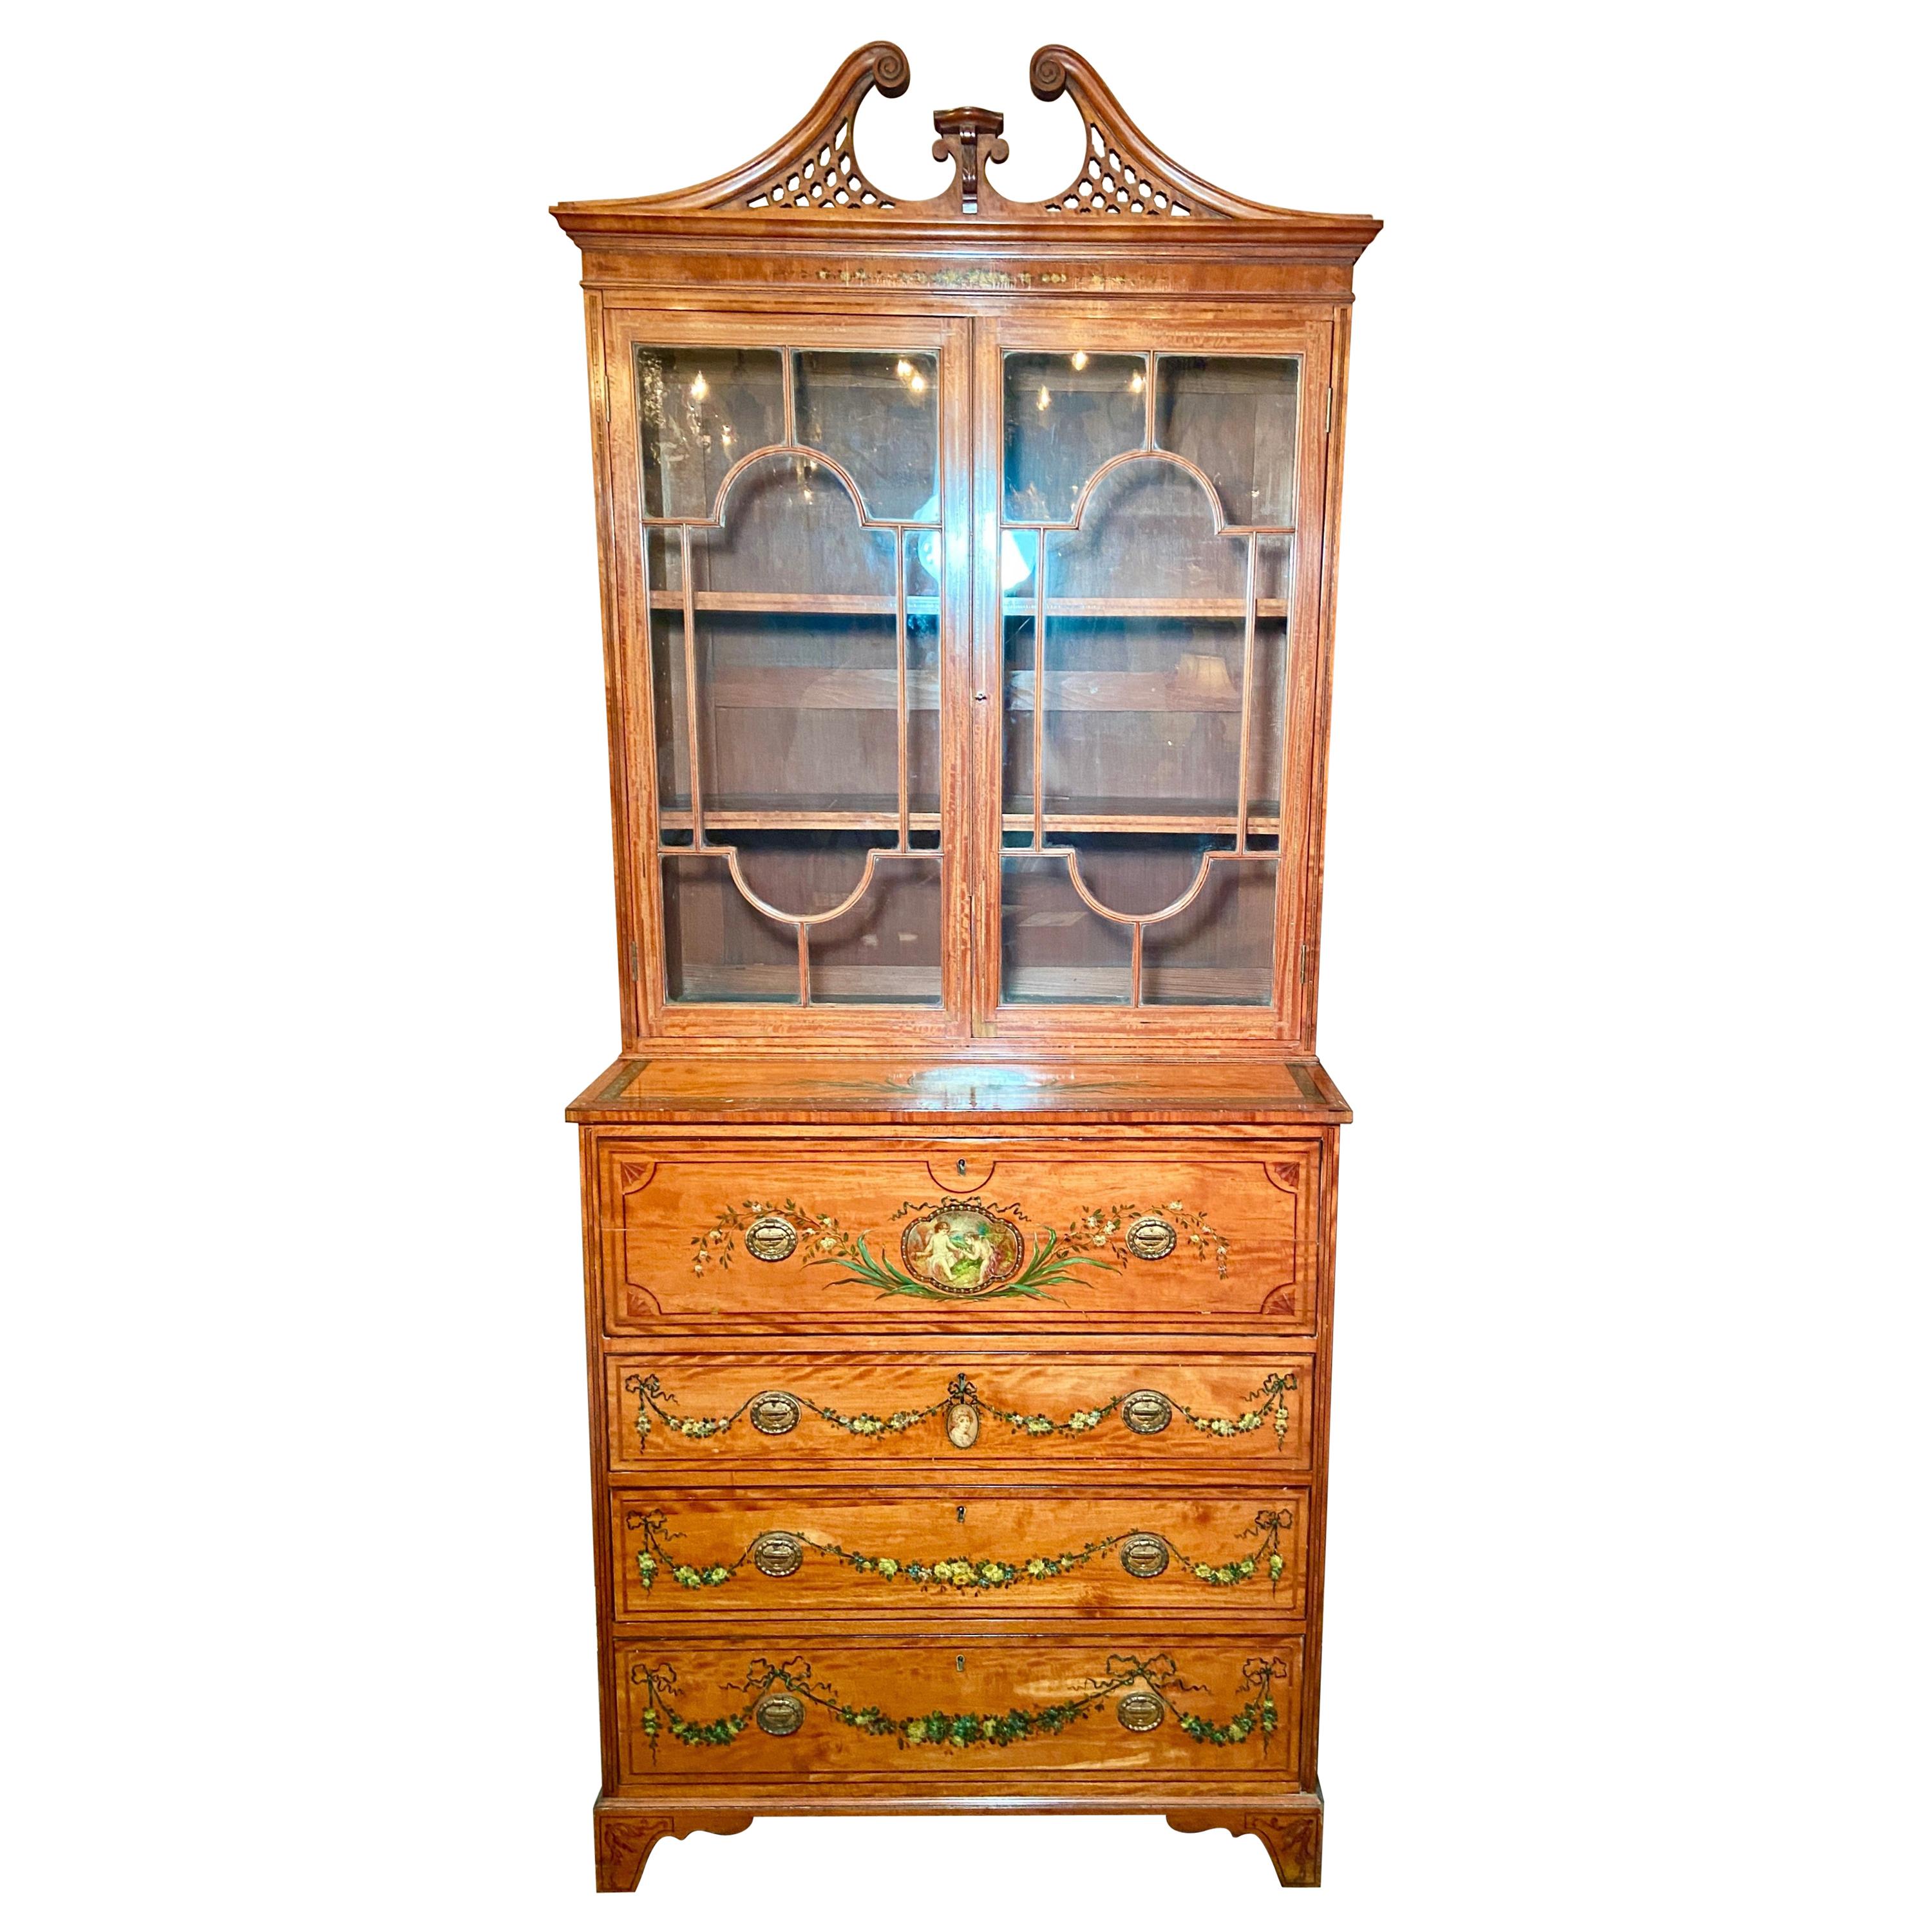 Antique English Satinwood Bookcase with Fall Front Desk, Circa 1870-1890